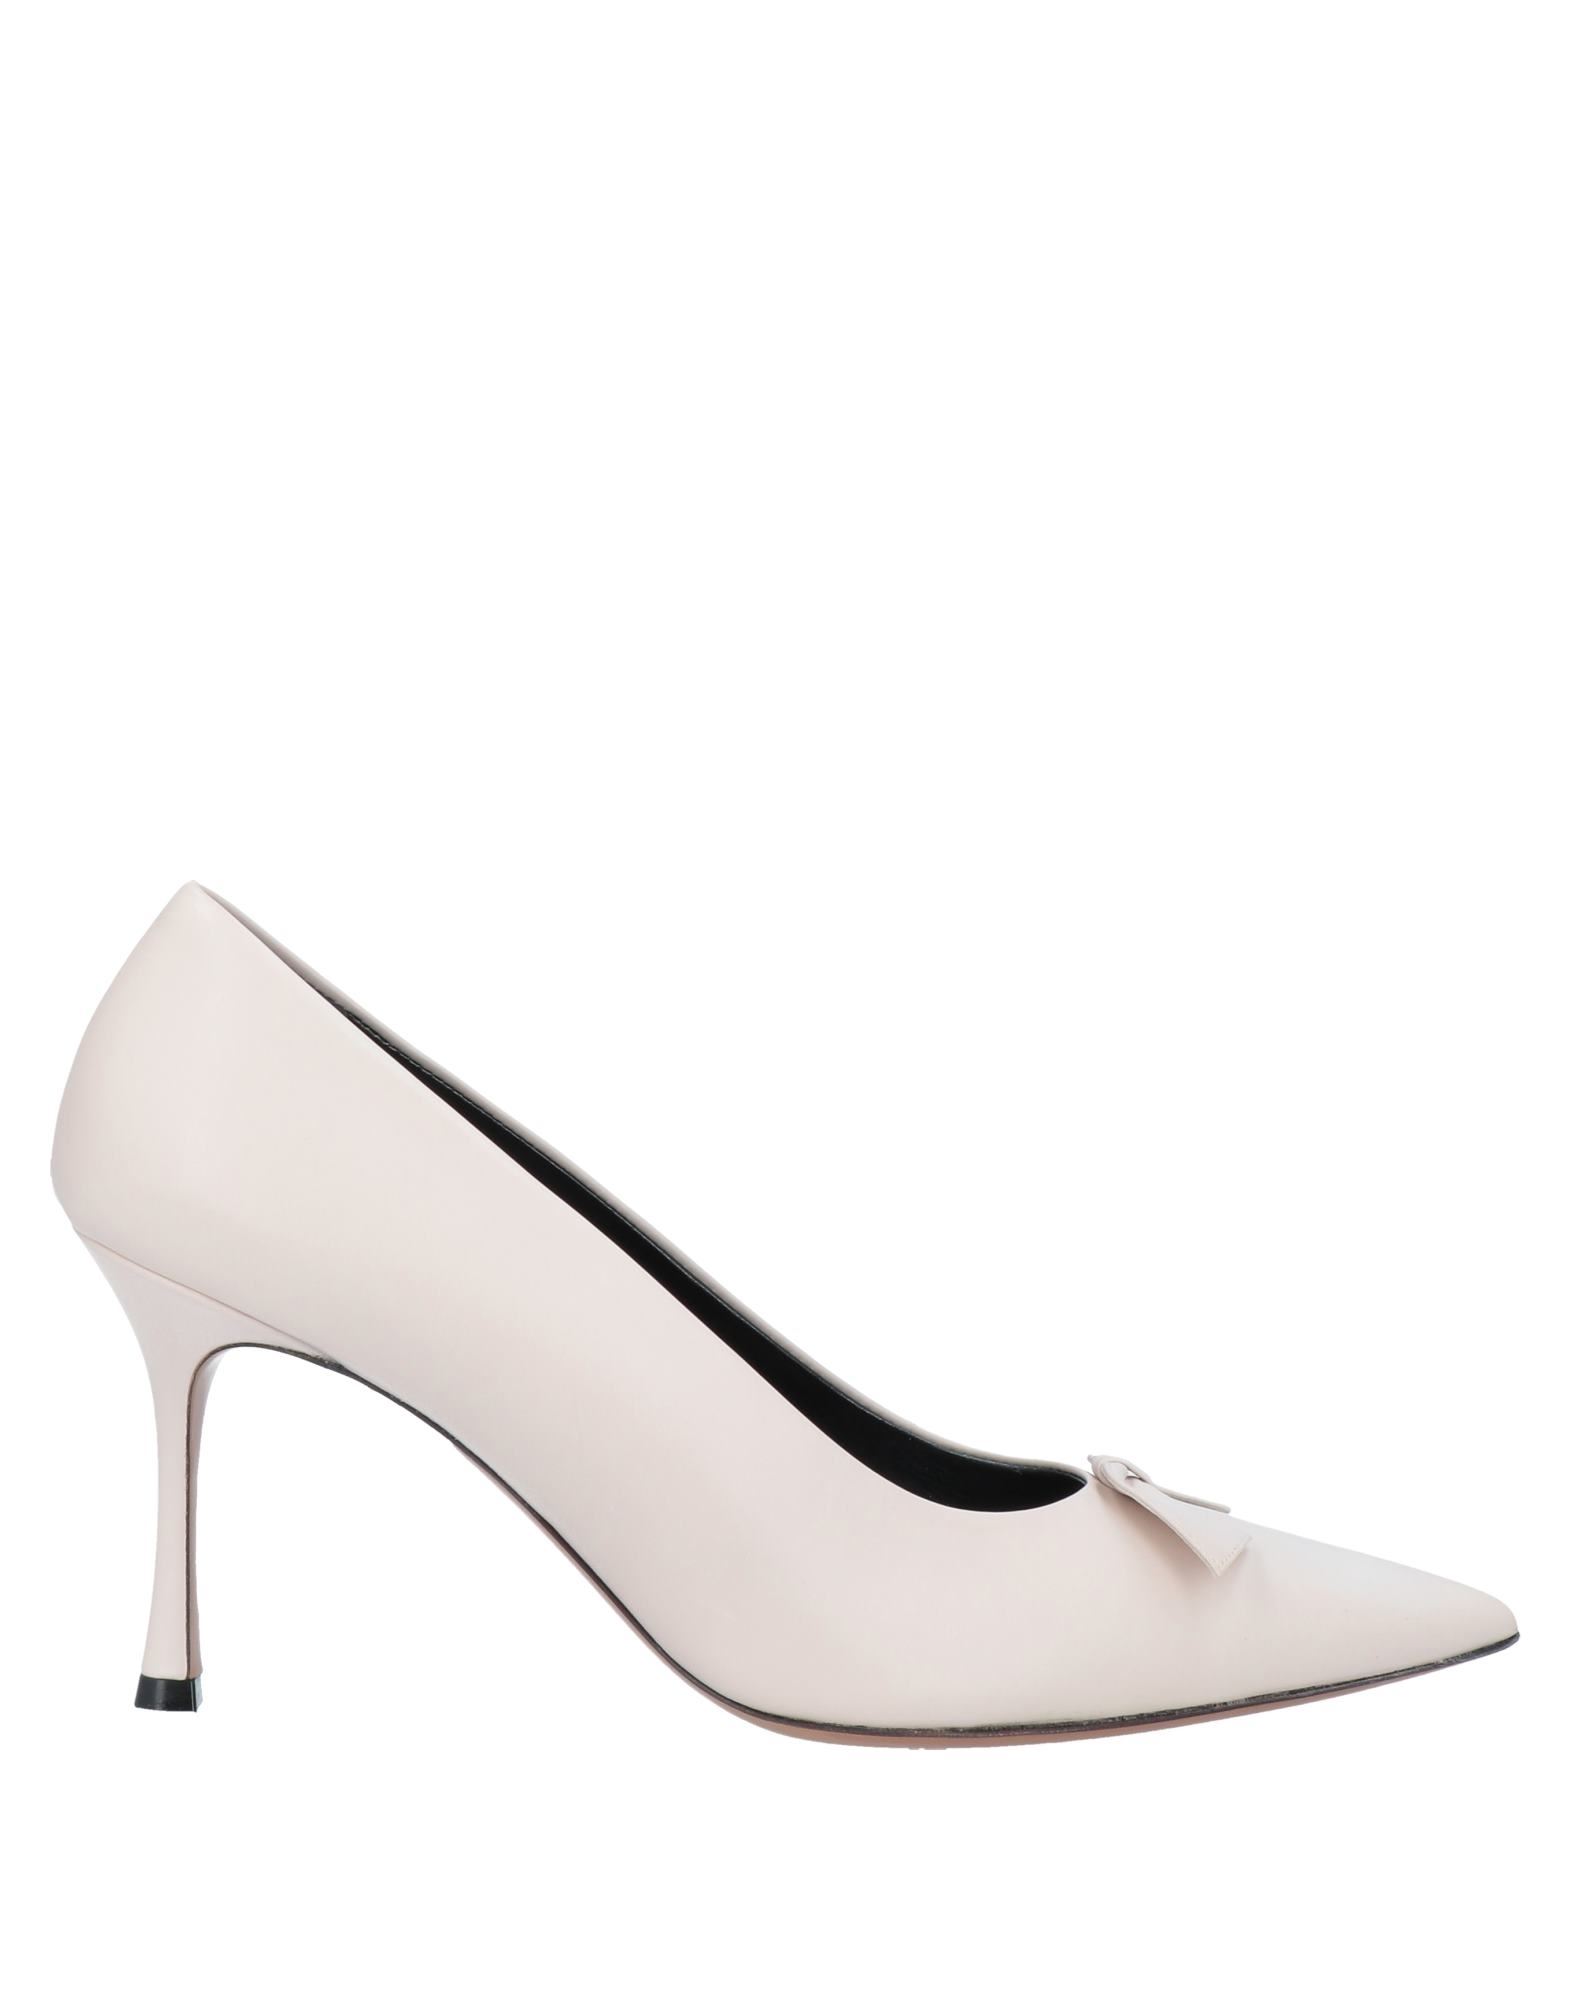 The Row Pumps In Ivory | ModeSens